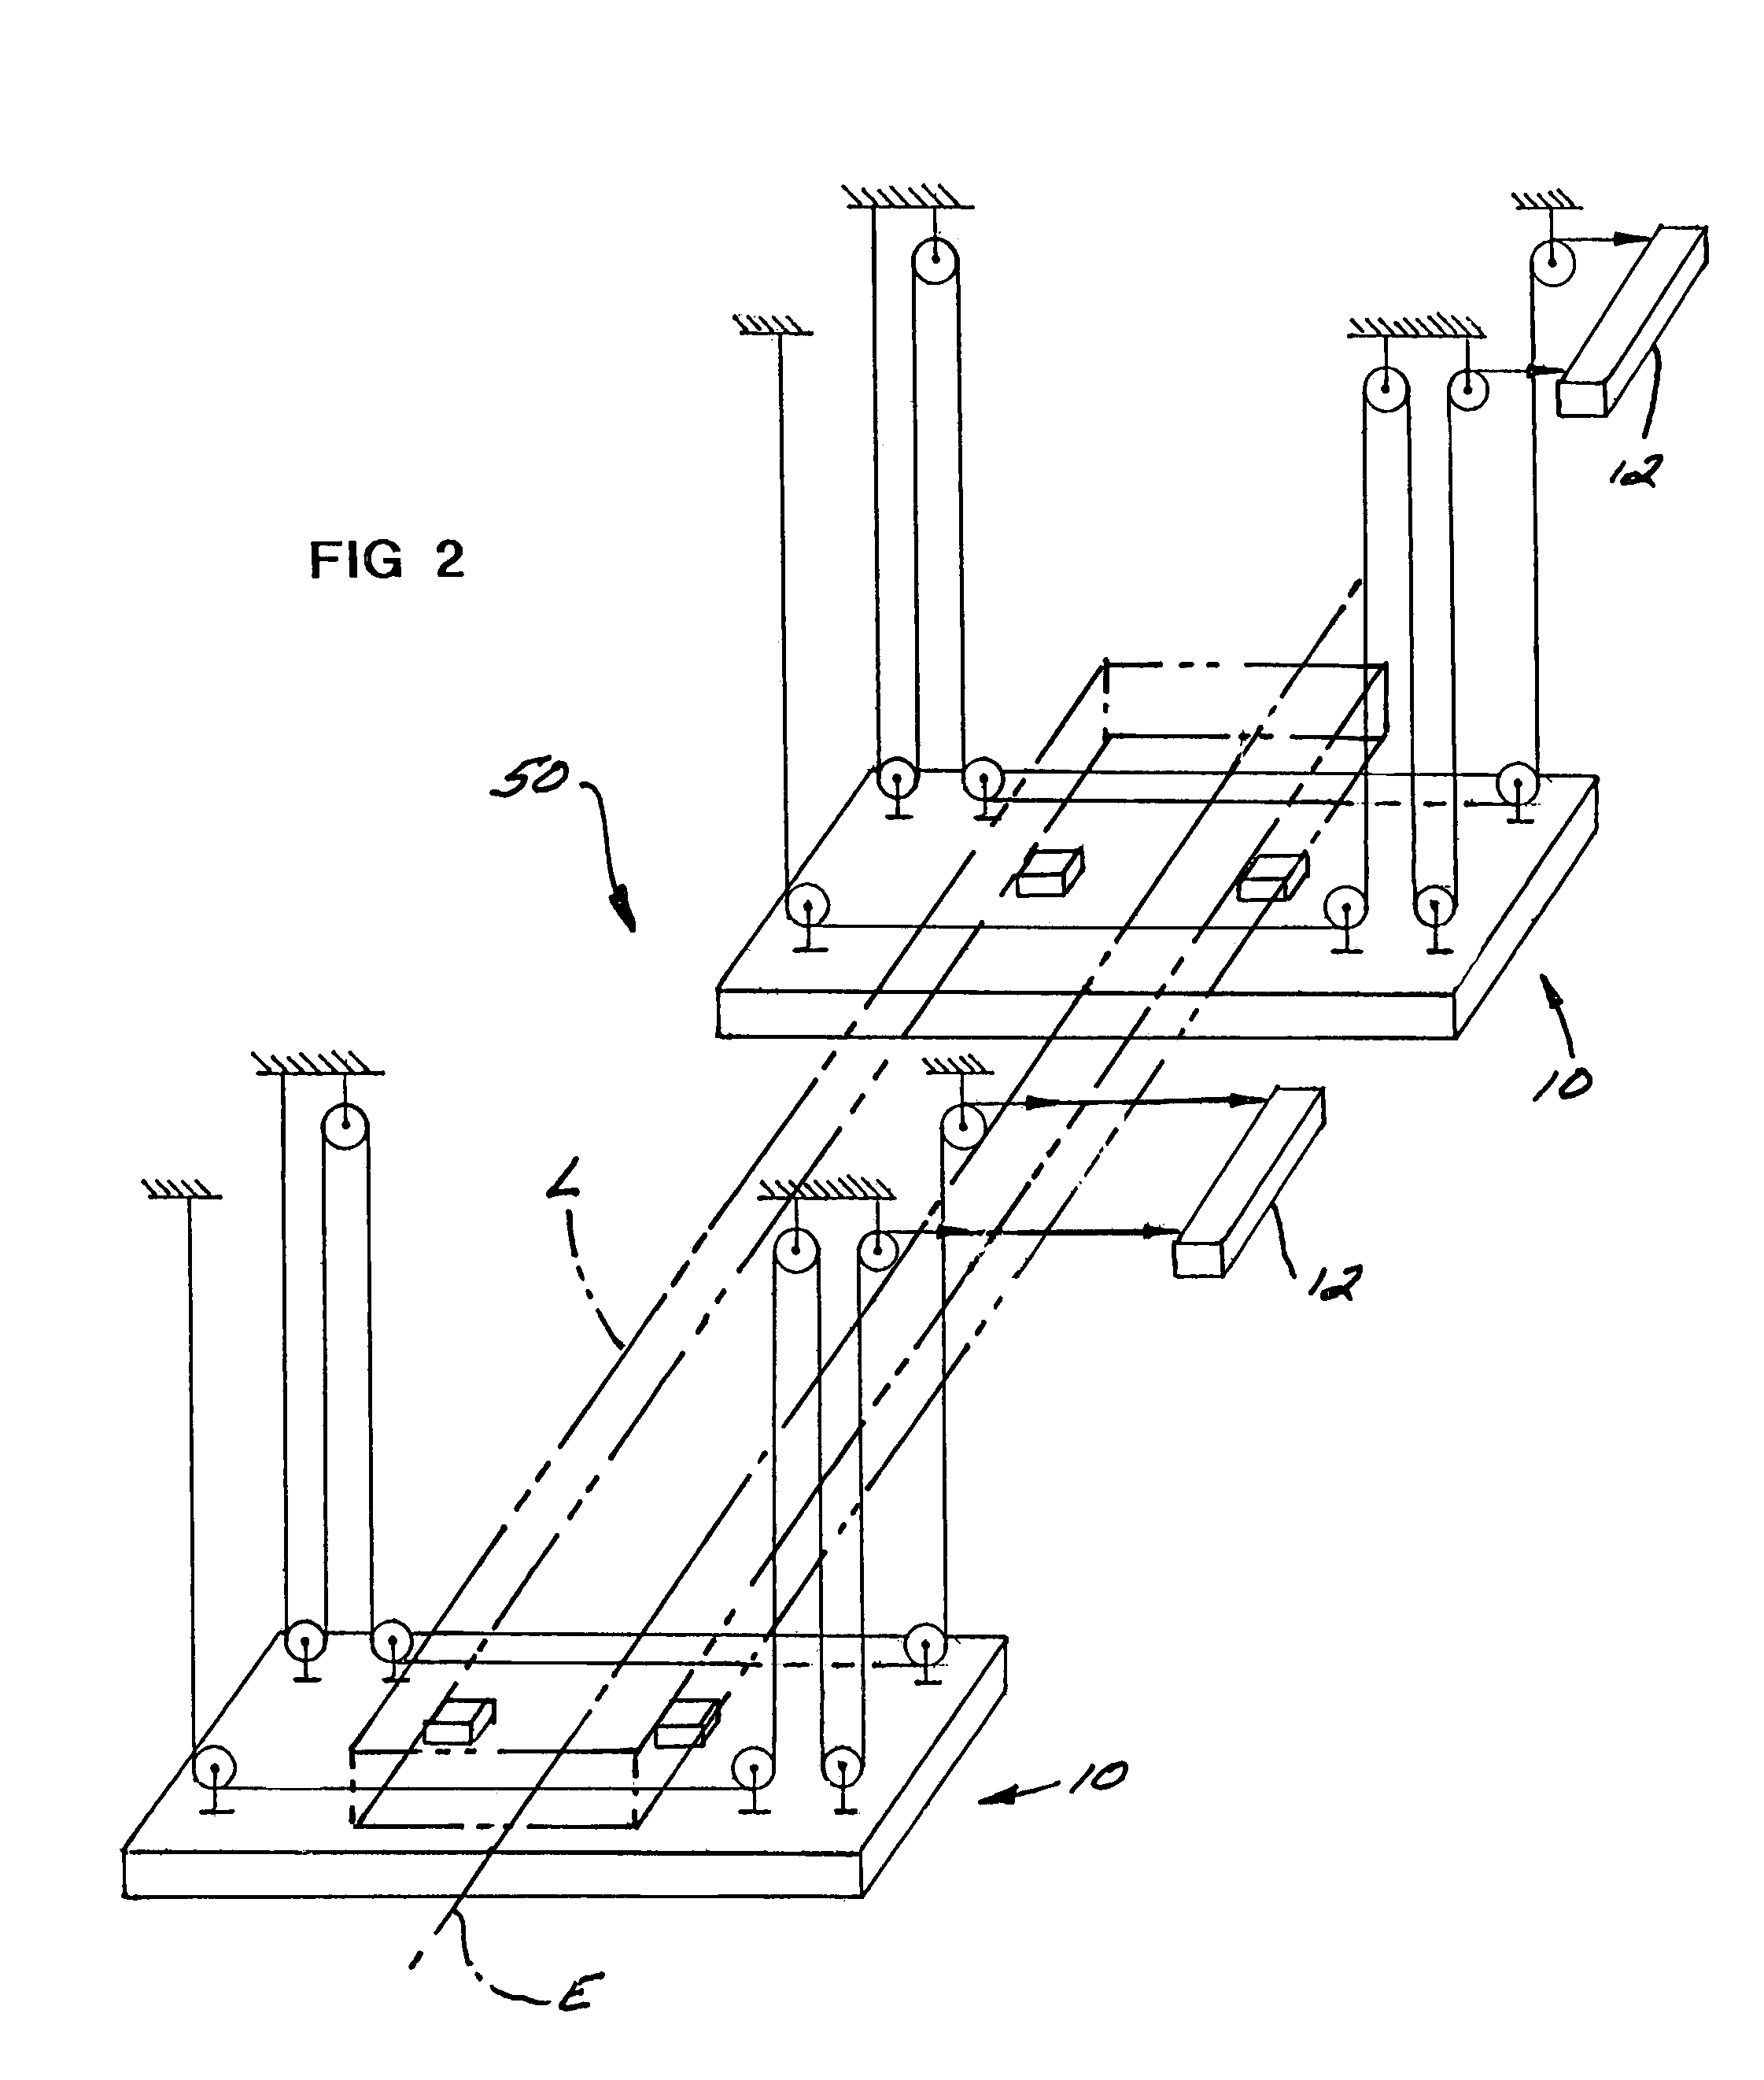 Self-stabilizing suspension and hoisting system